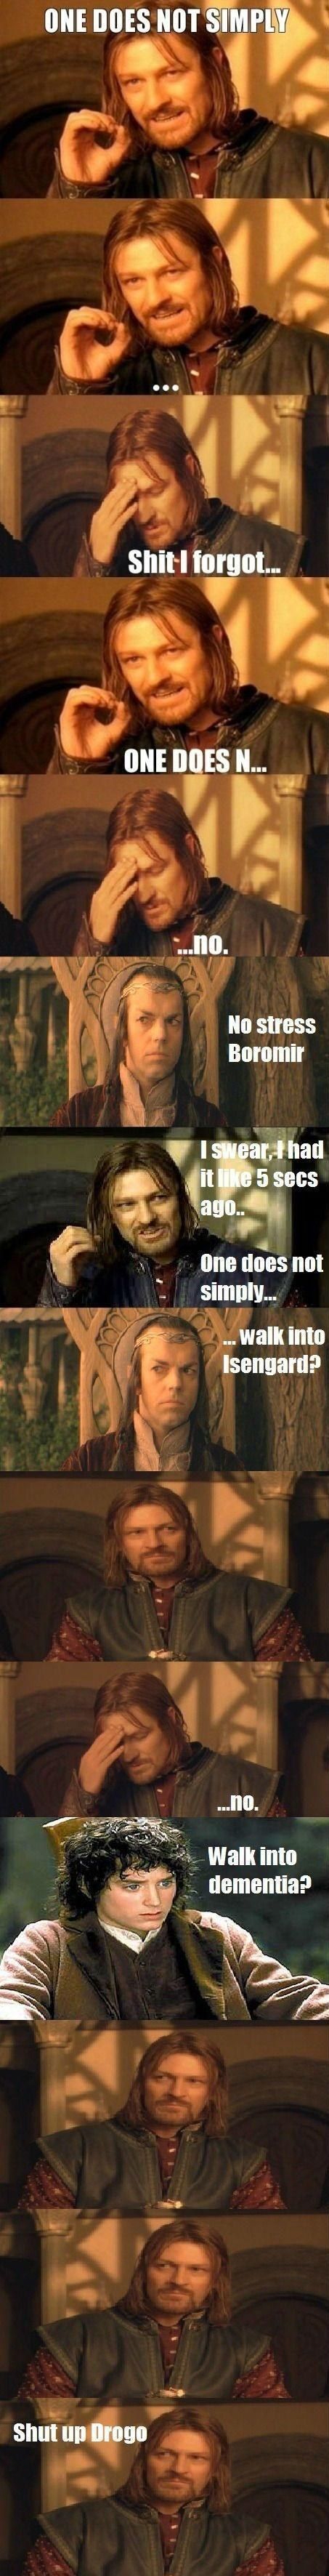 ONE DOES NOT SIMPLY ... Shit I forgot ONE DOES N... ...no No stress Boromir